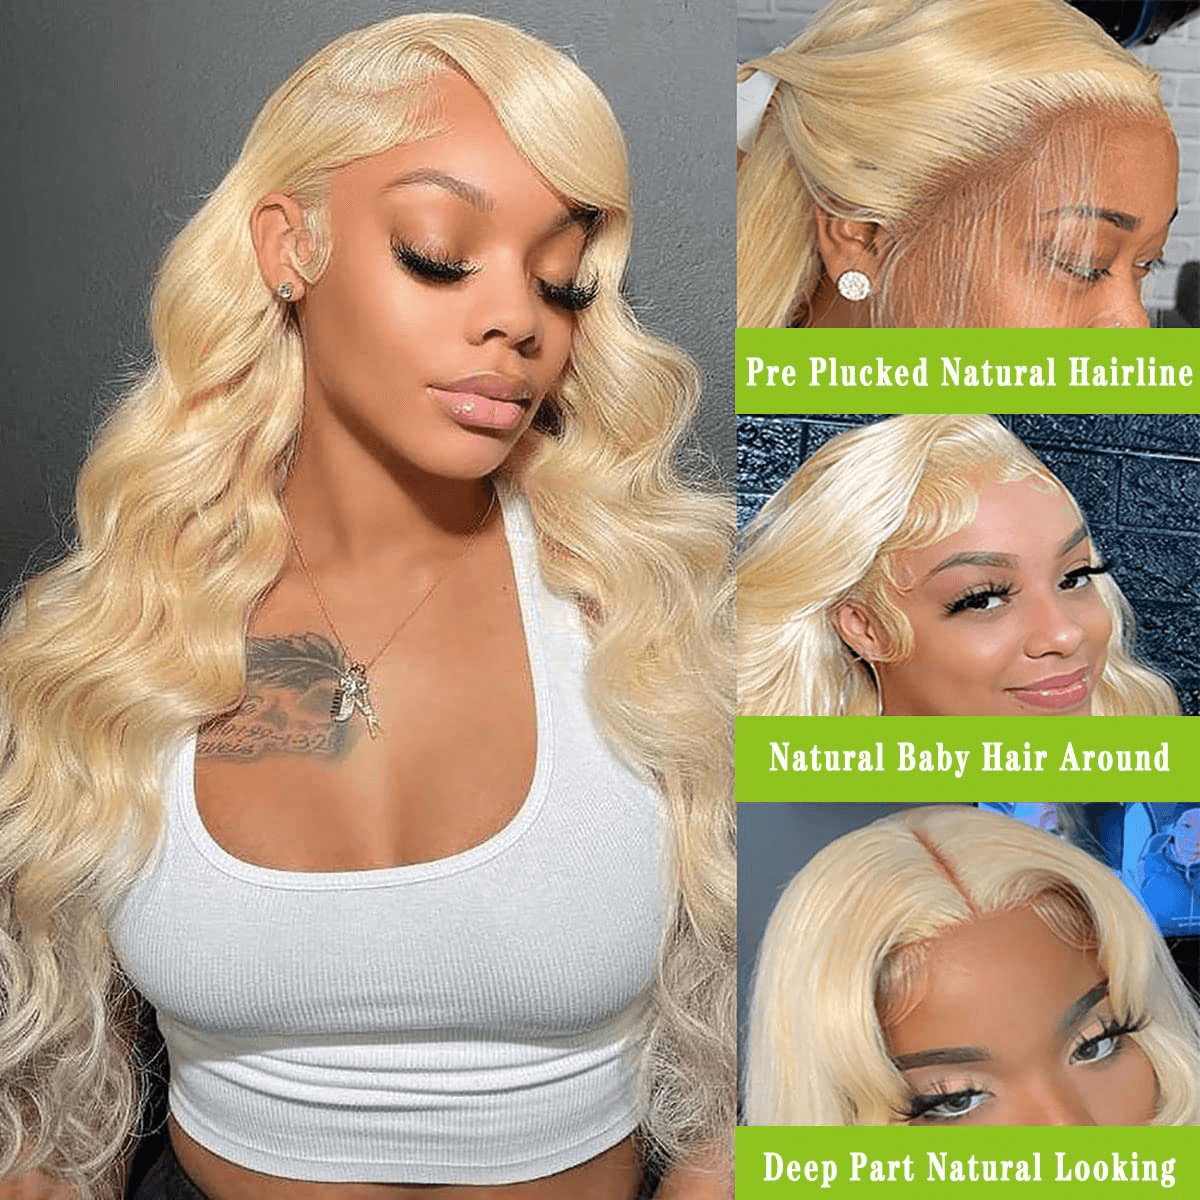 Wesface Wigs 613 Lace Front Wig Human Hair 13×4 Transparent Body Wave Blonde Lace Front Wigs Human Hair Pre Plucked with Baby Hair 613 Lace Frontal Wig Human Hair Wigs for Women